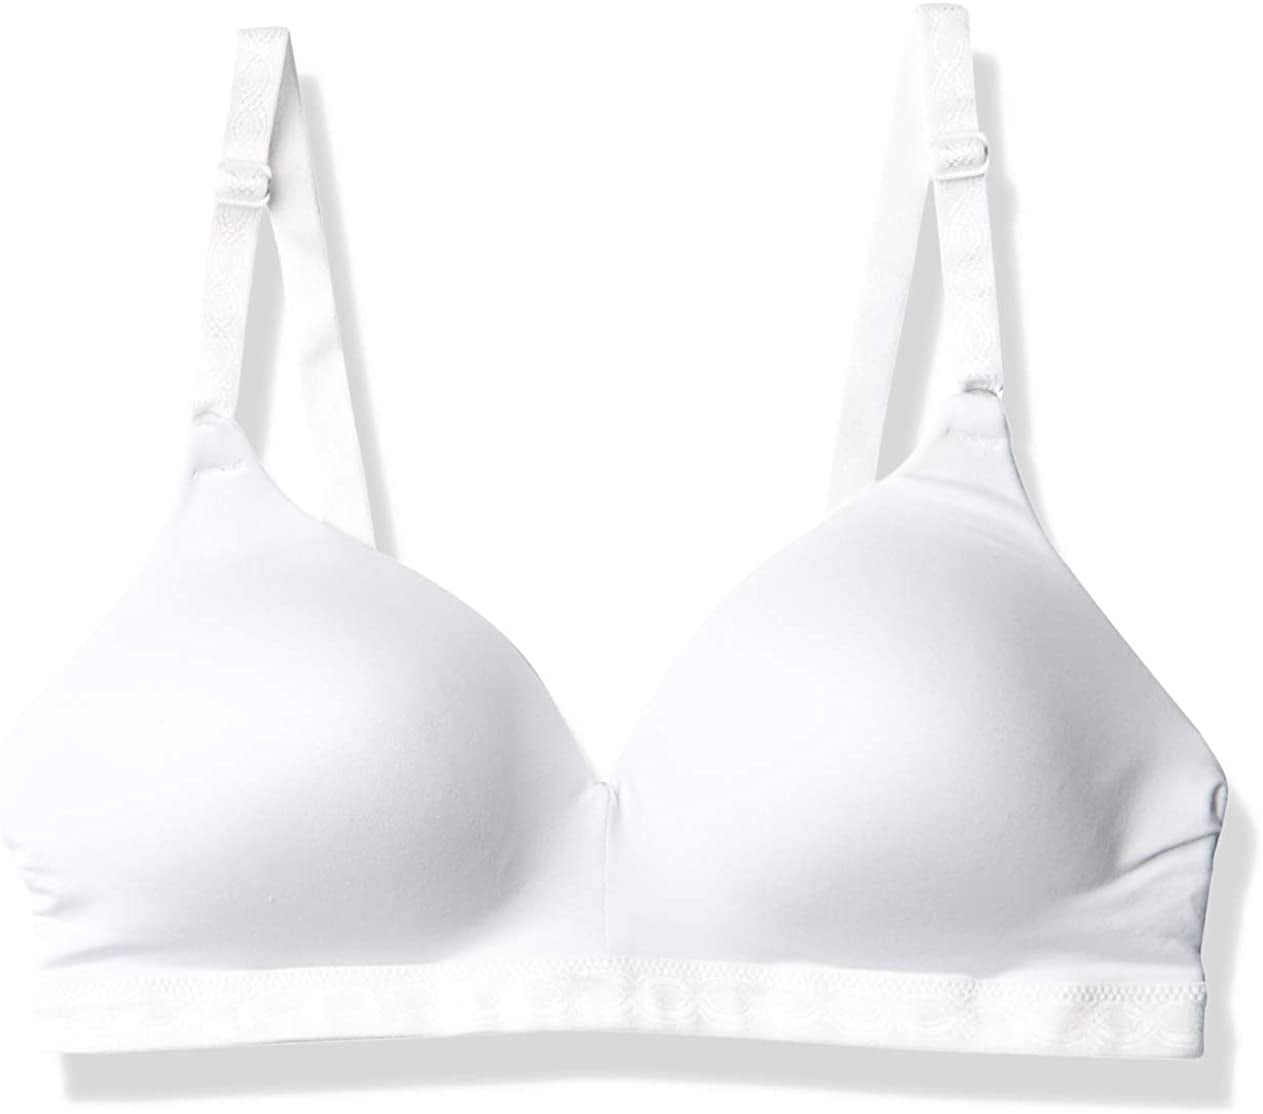 Warners® Blissful Benefits Super Soft With Comfort Straps Wireless Lightly  Lined Comfort Bra RM8141W